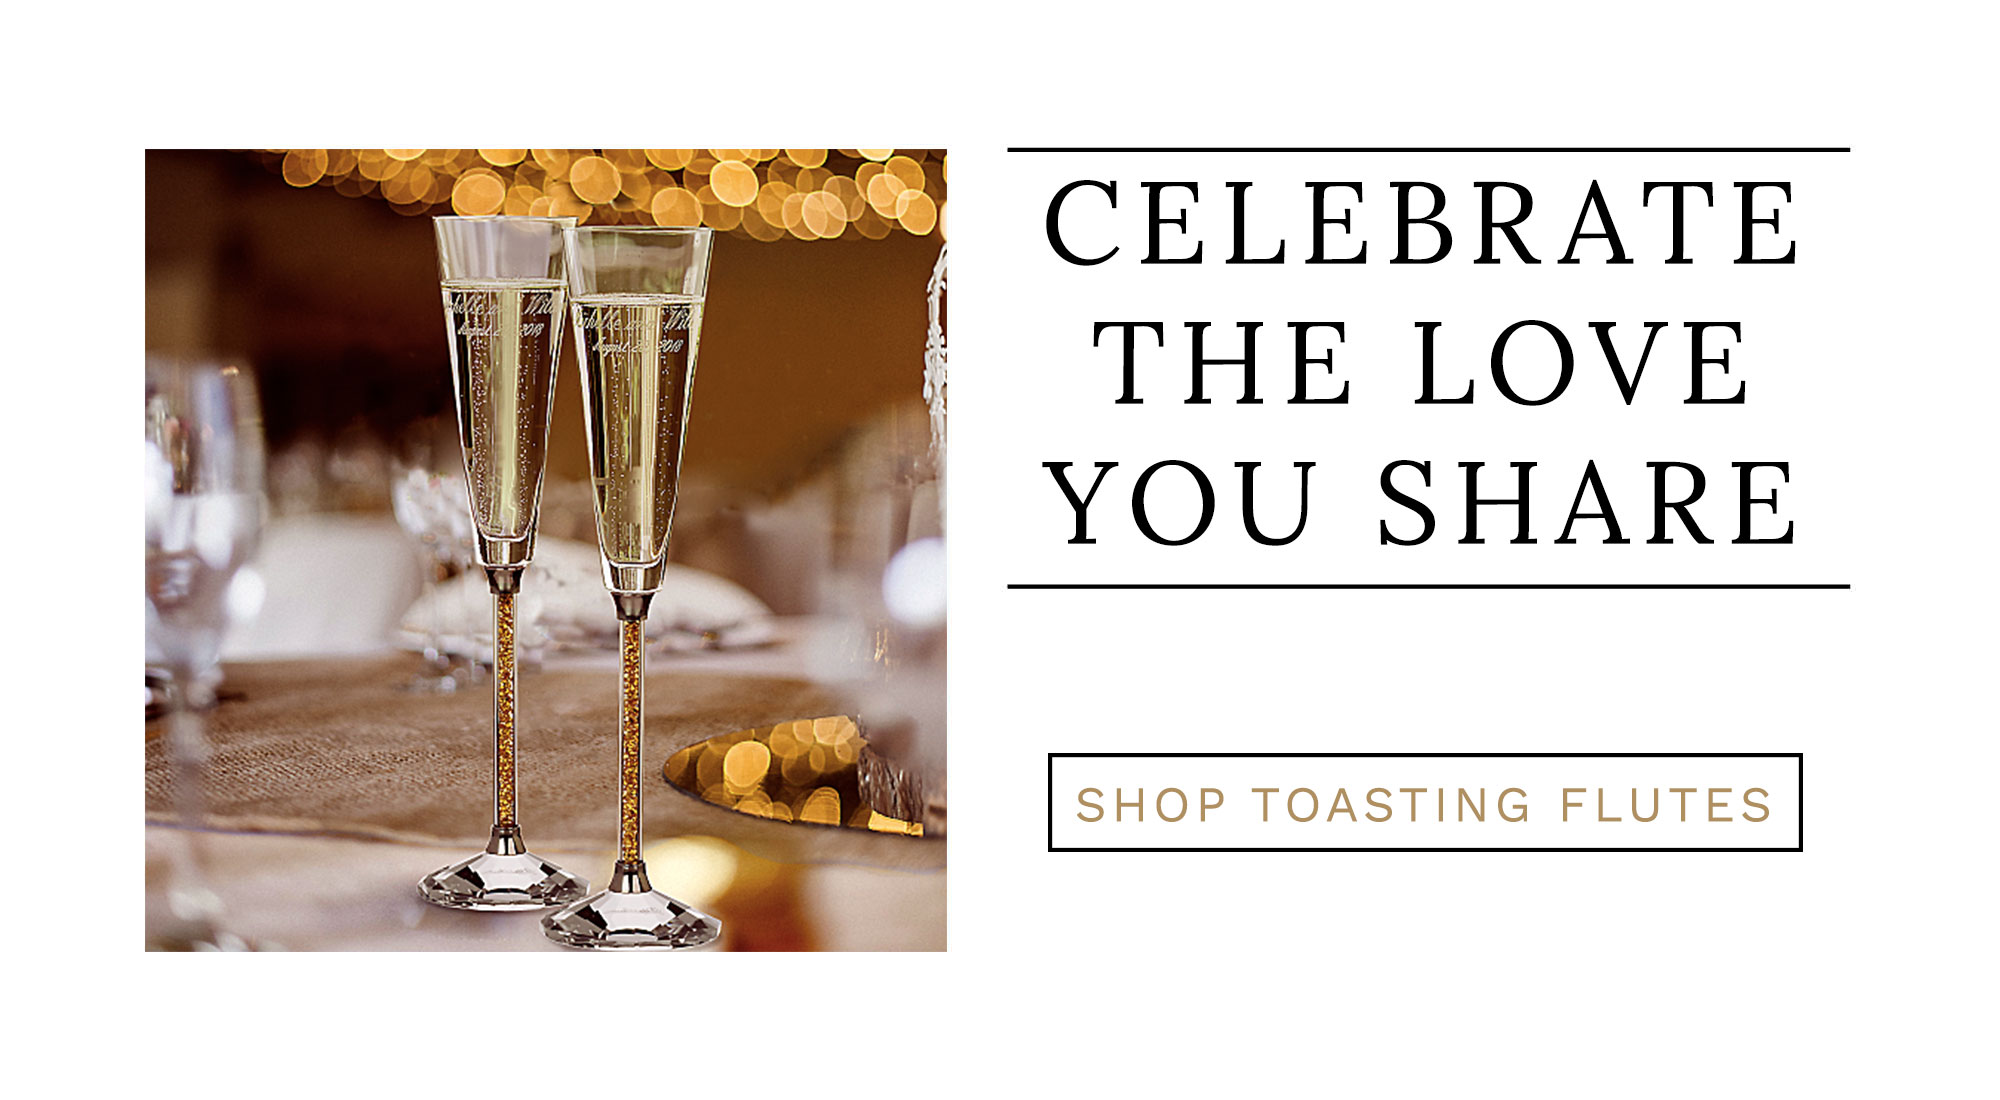 shop toasting flutes exclusively weddings